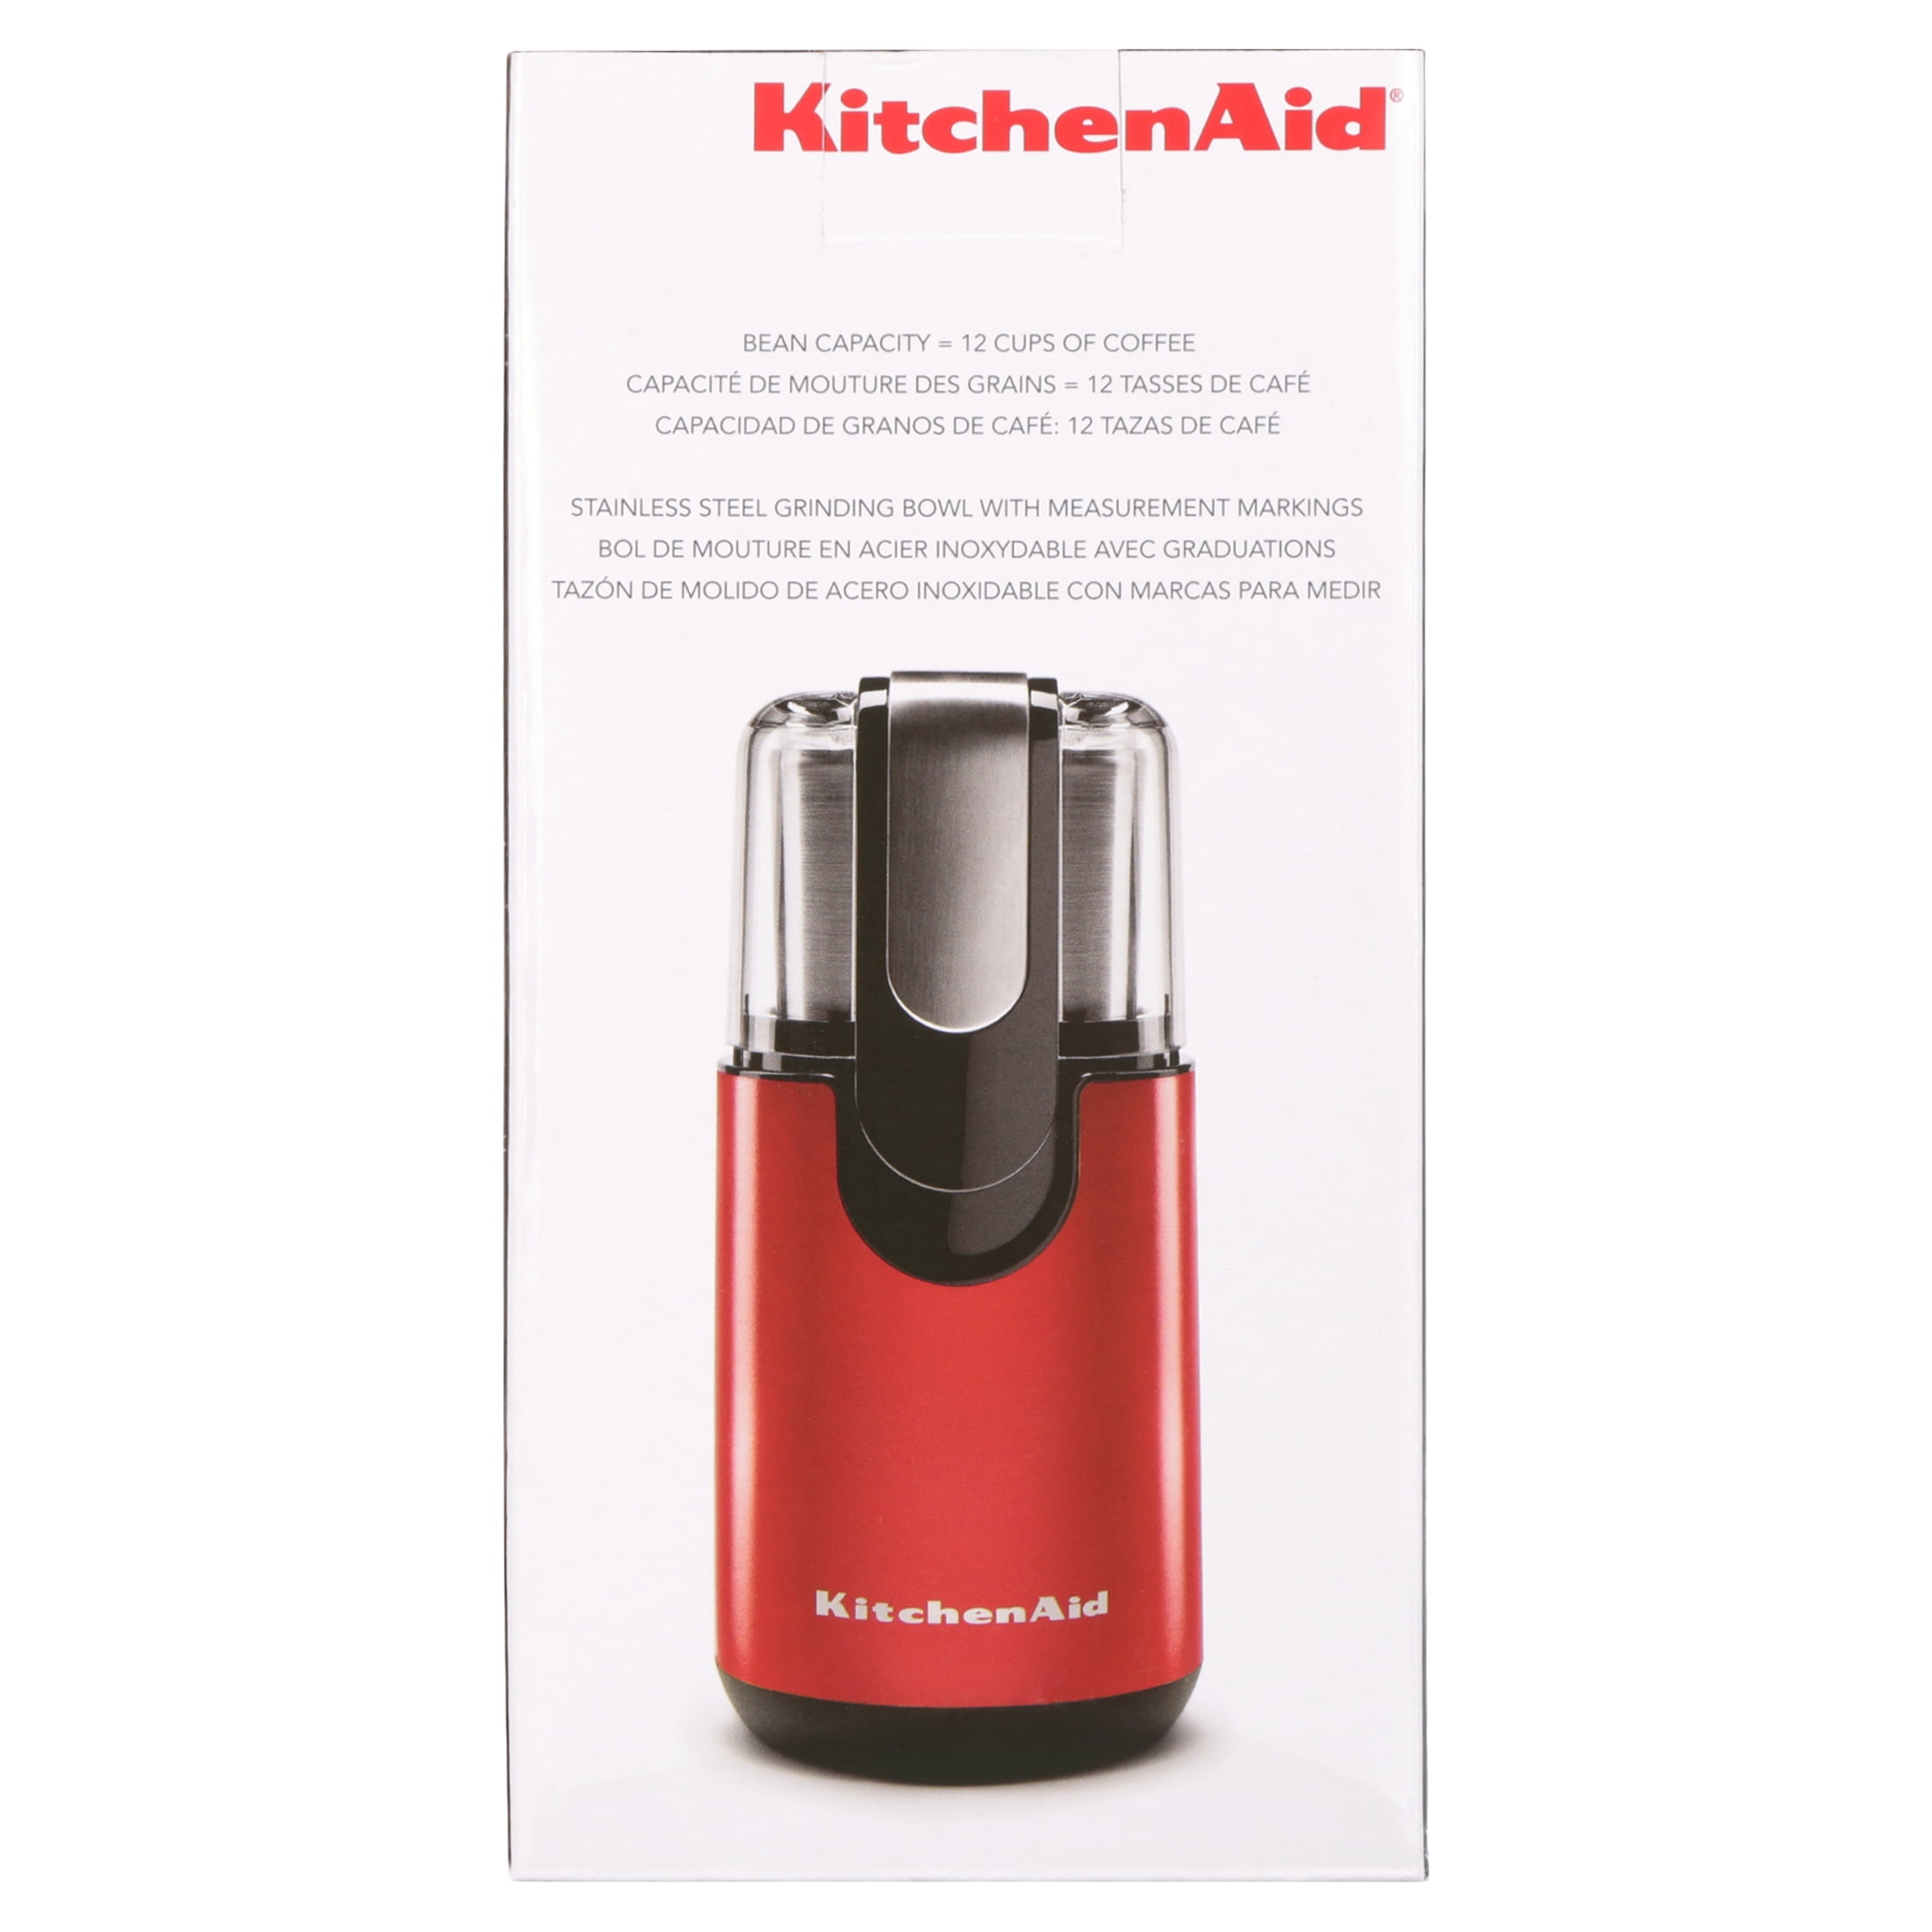 KitchenAid's Blade Coffee Grinder is nearly 35% off today, now $20 at